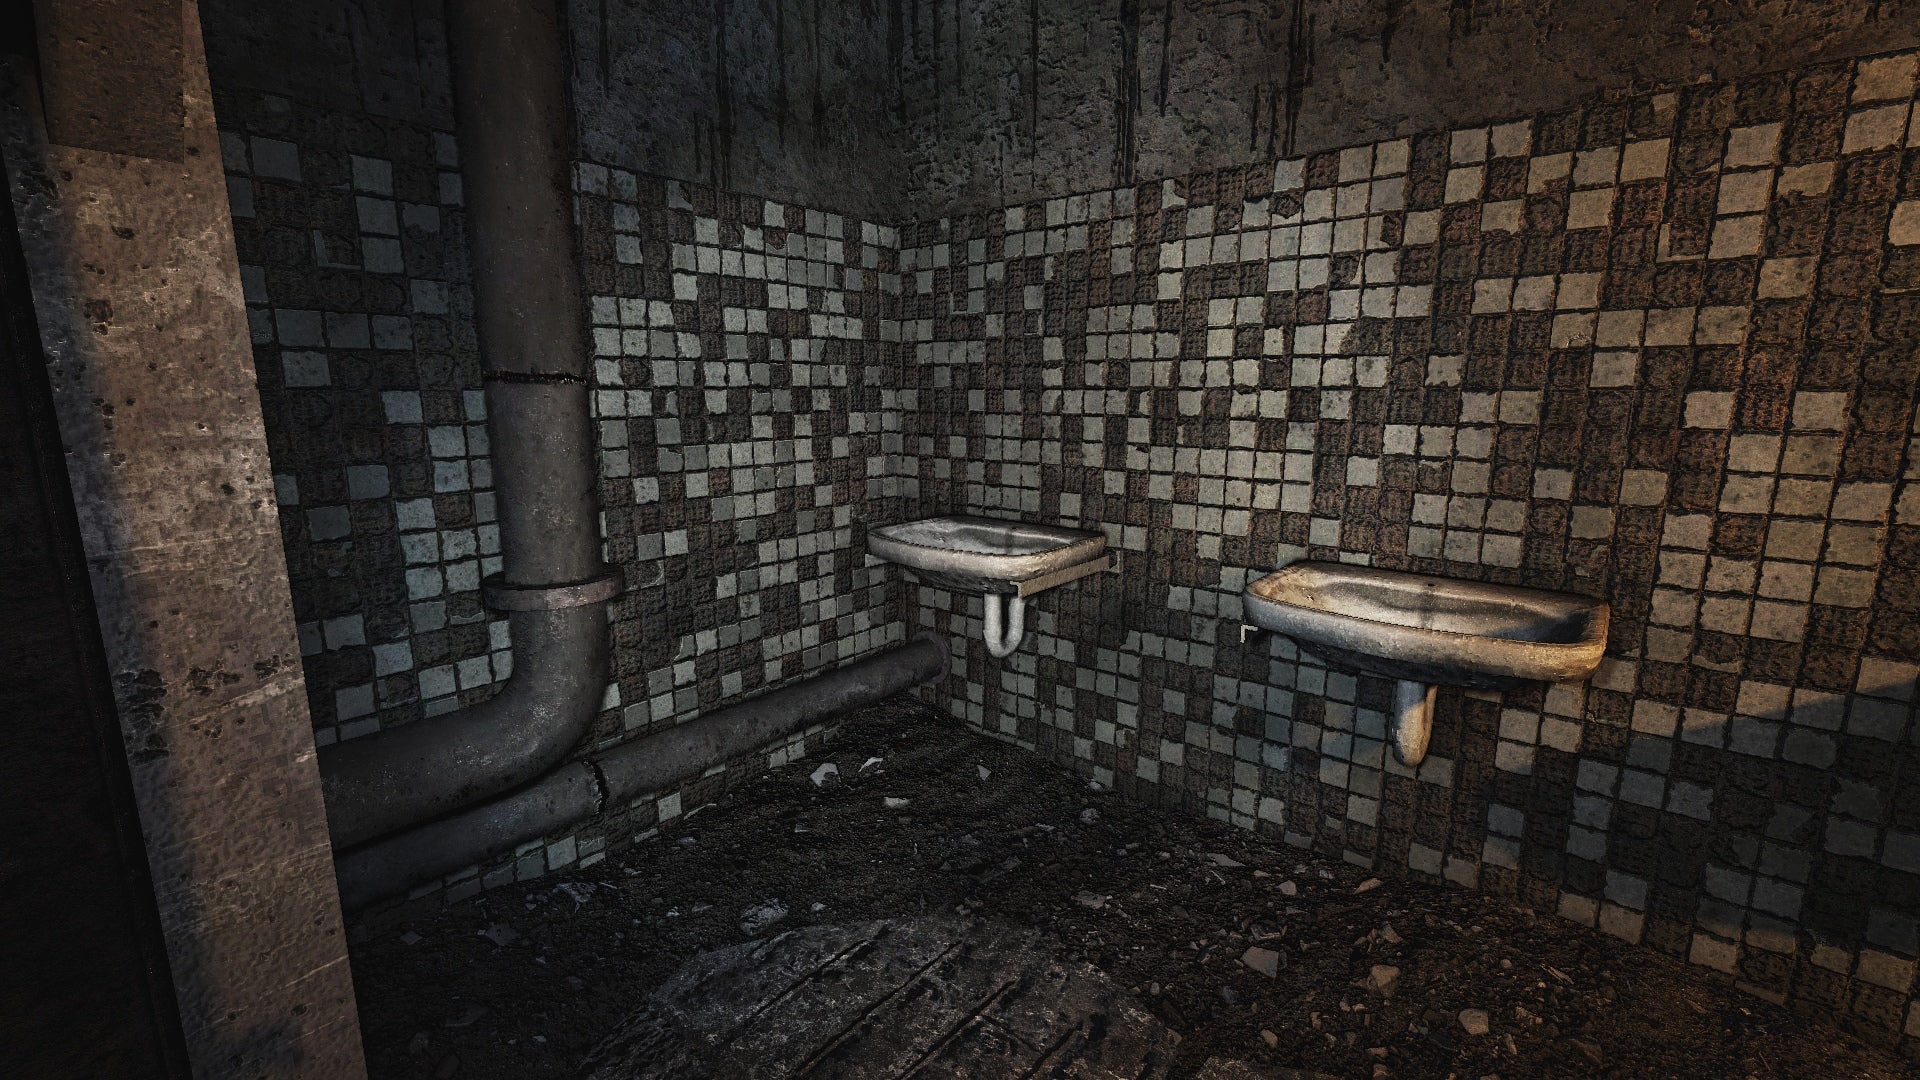 Player onlooks a bathroom with two sinks in fan made overhaul mod for STALKER: Shadow of Chernobyl.